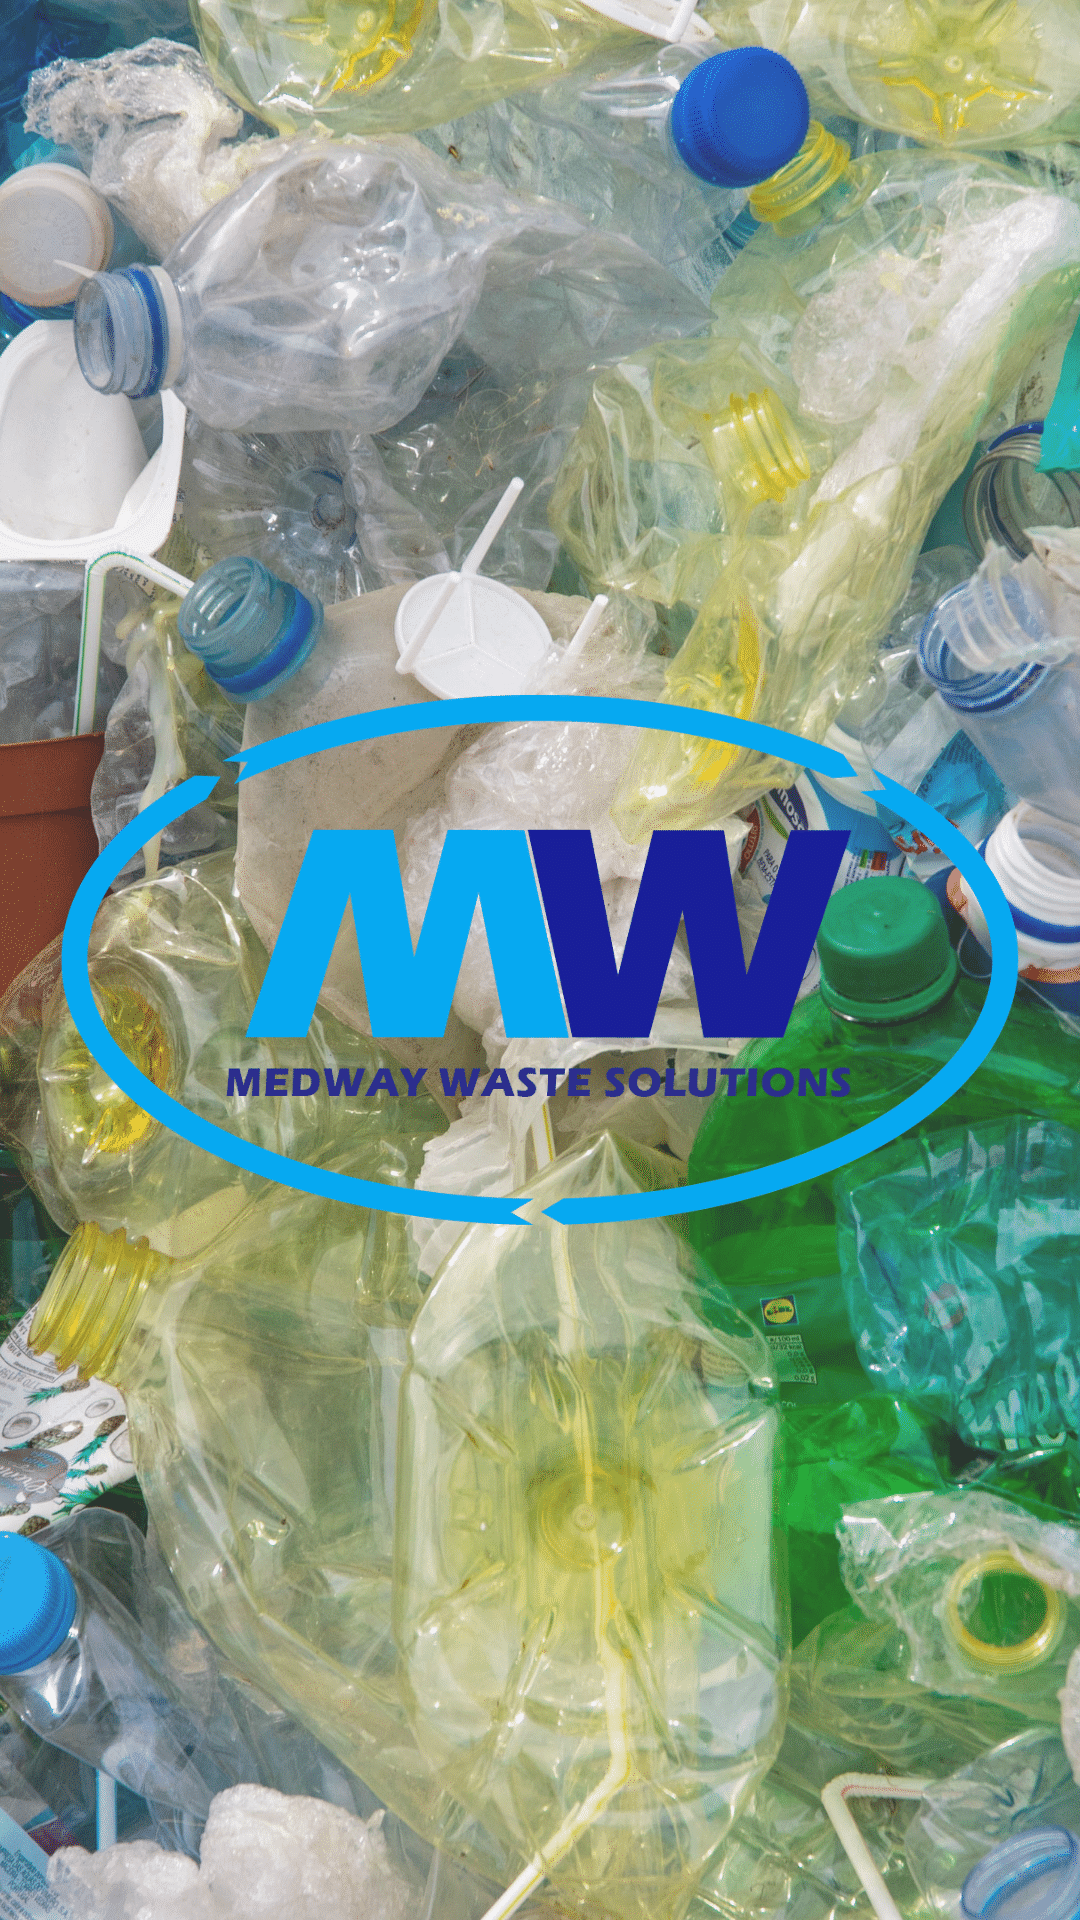 recycle waste with medway waste solutions